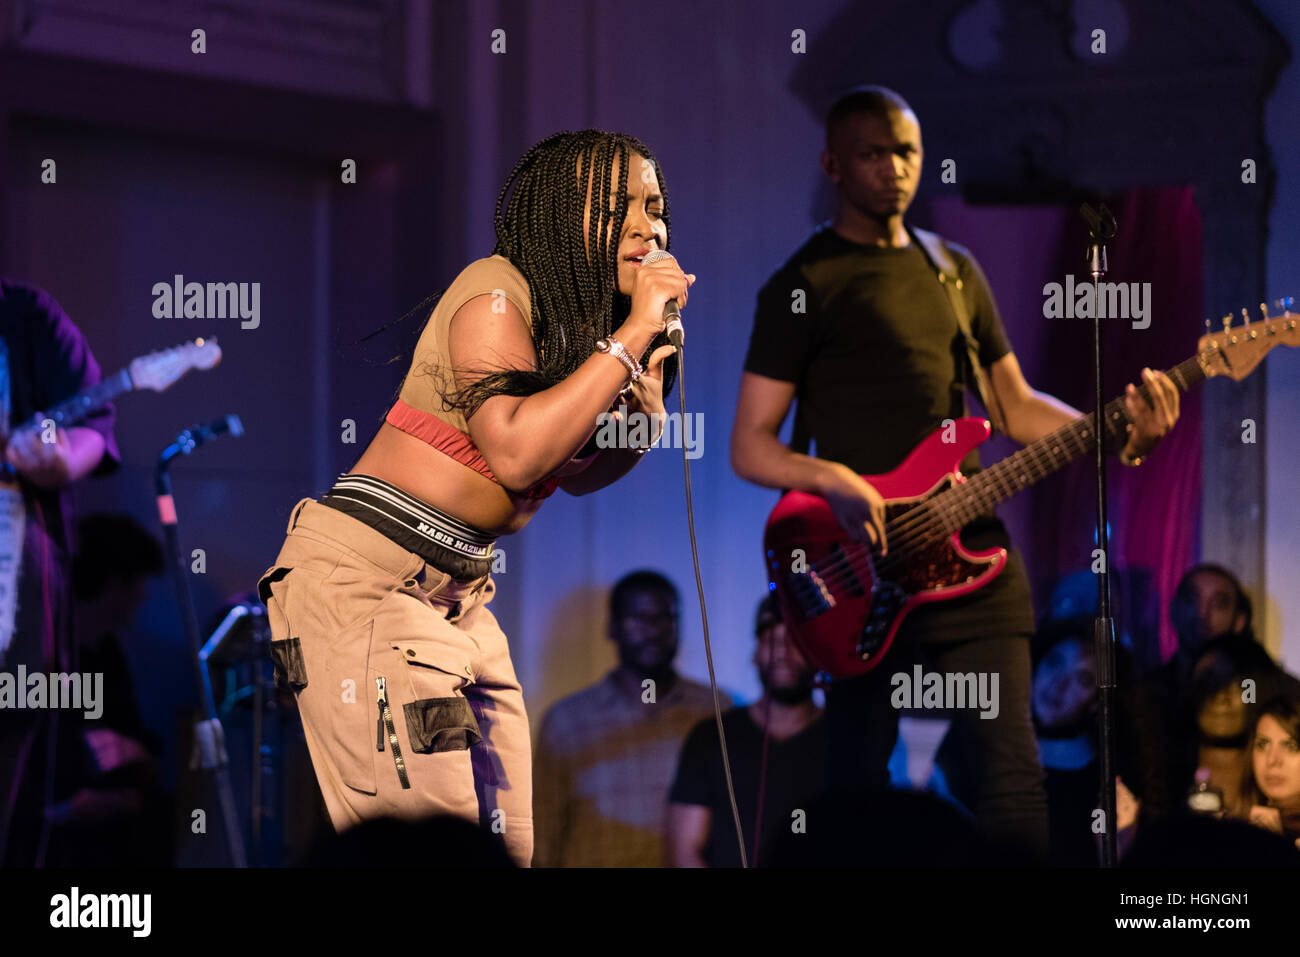 Ray BLK singing with her band at a live concert in London in 2016. Stock Photo